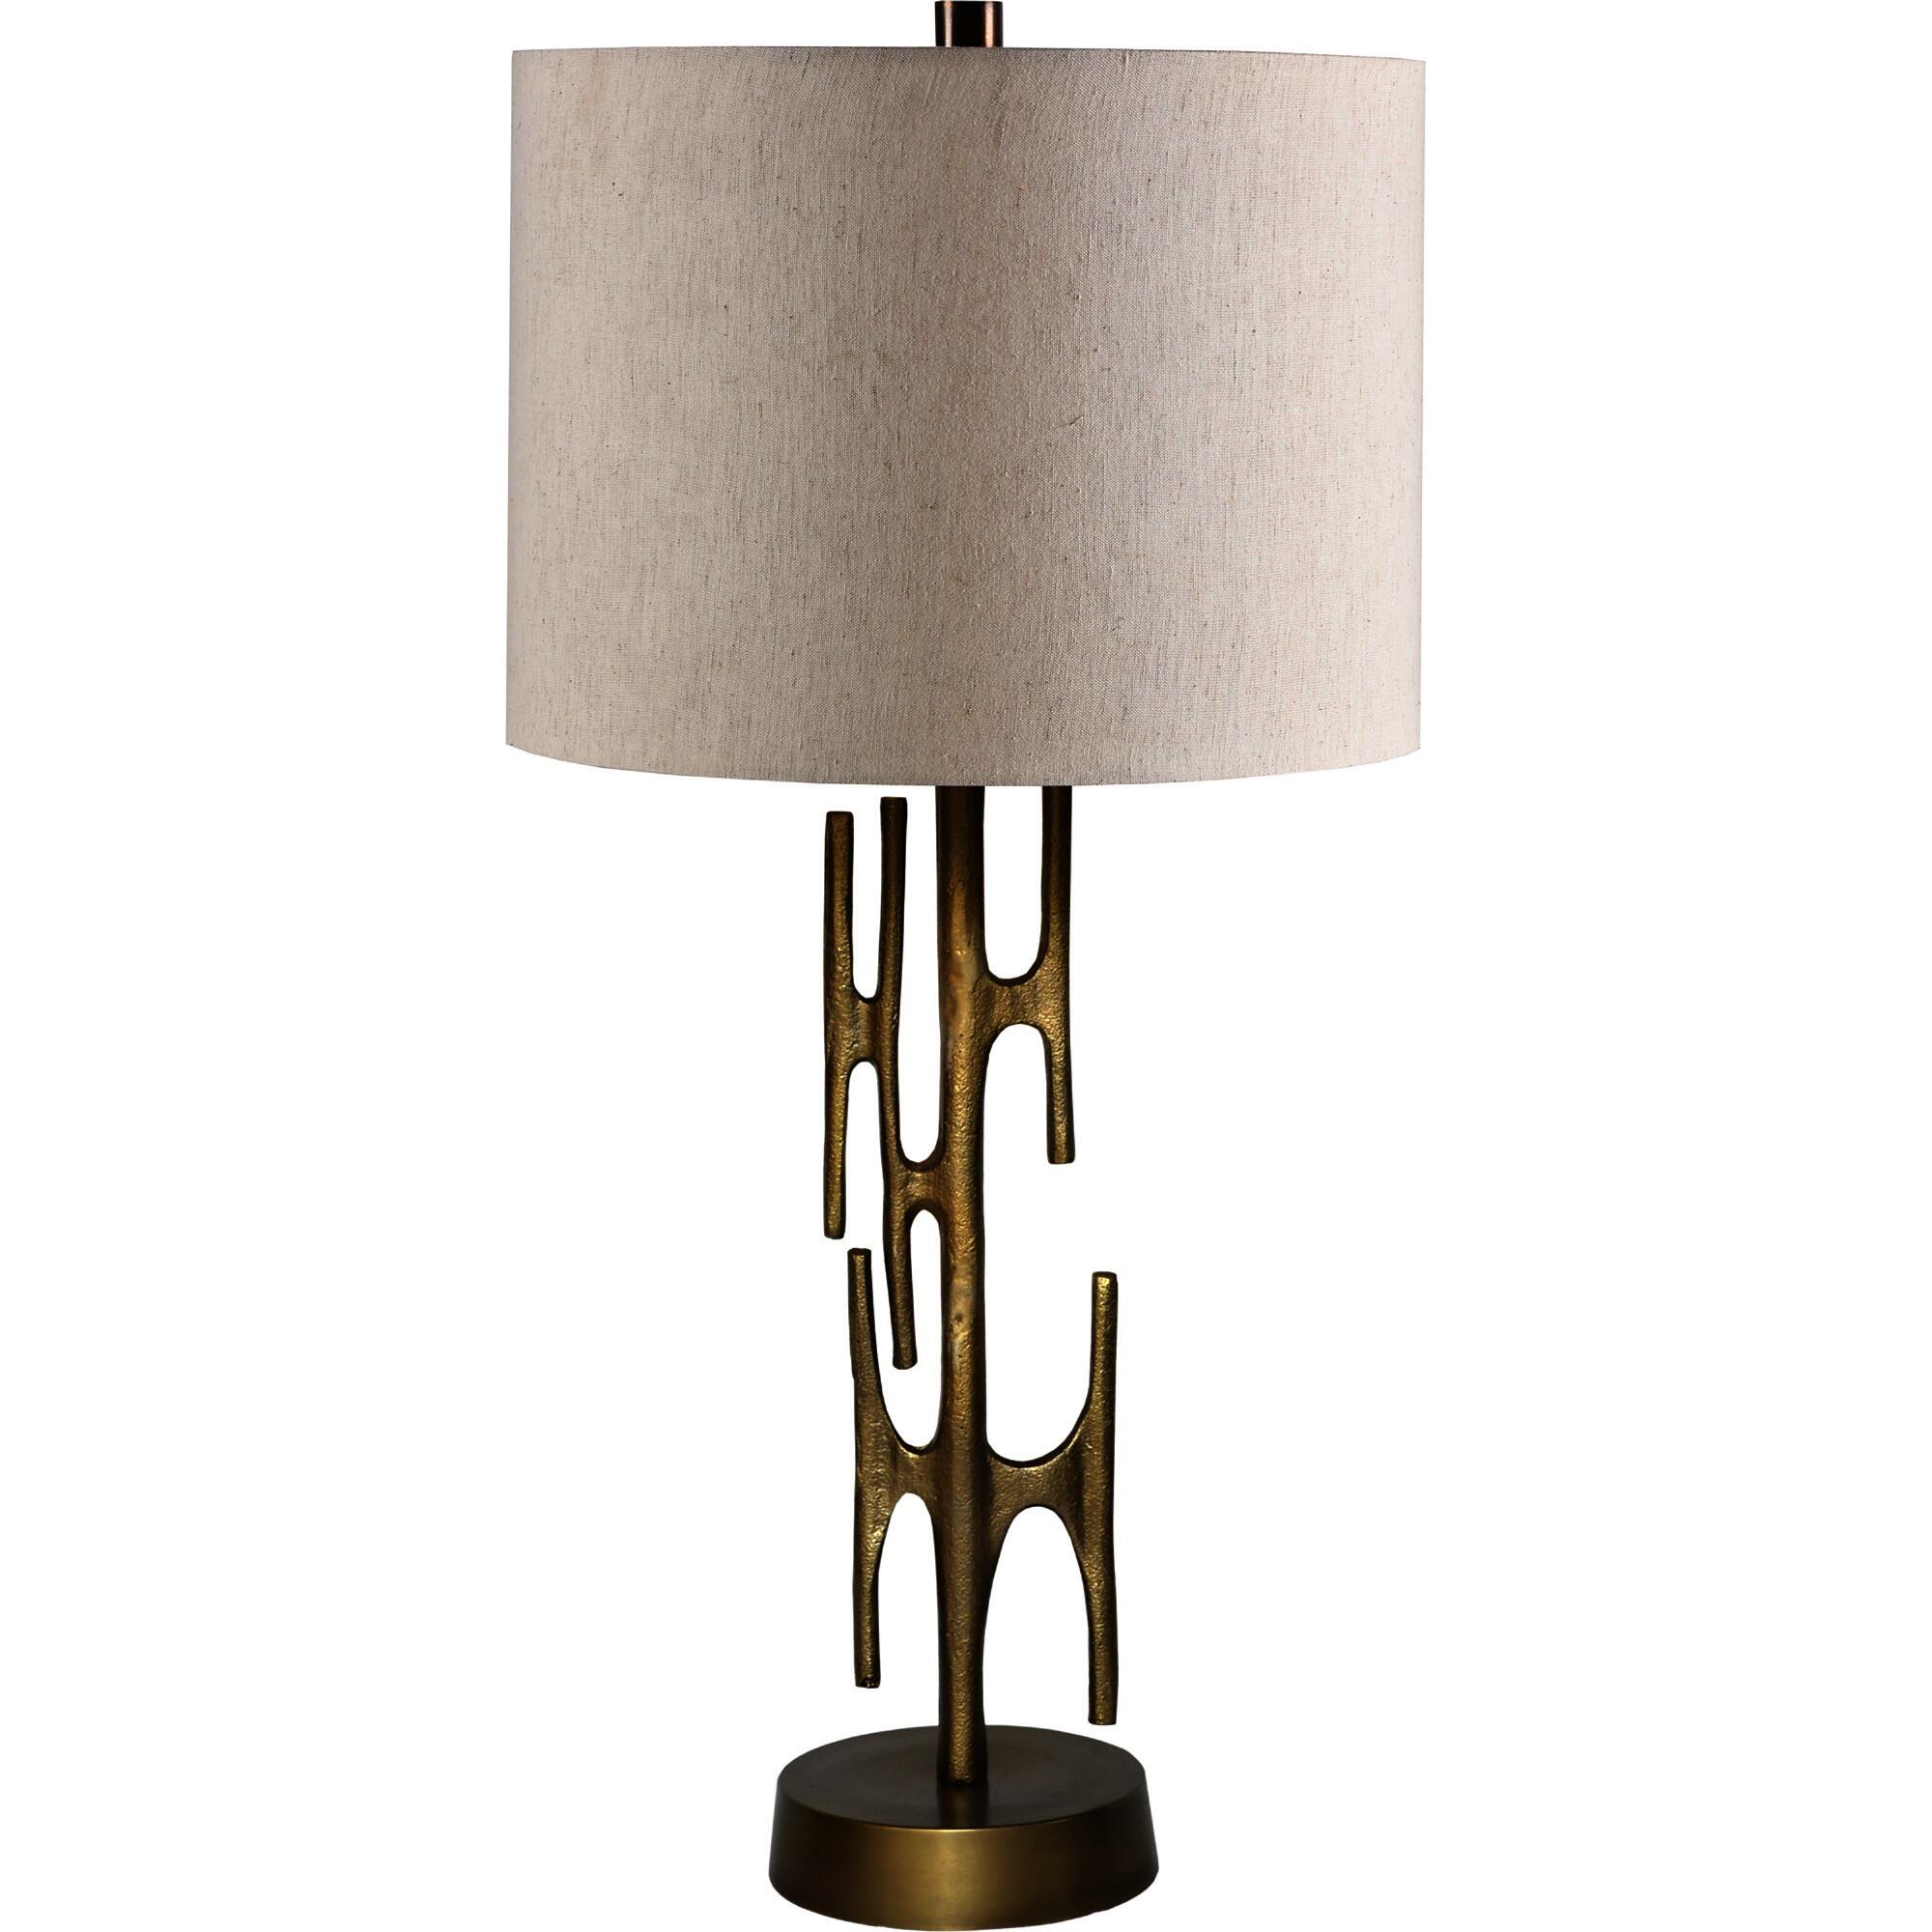 Antique Brass Sculpture Clarion Table Lamp: Metallic/Gold by World Market